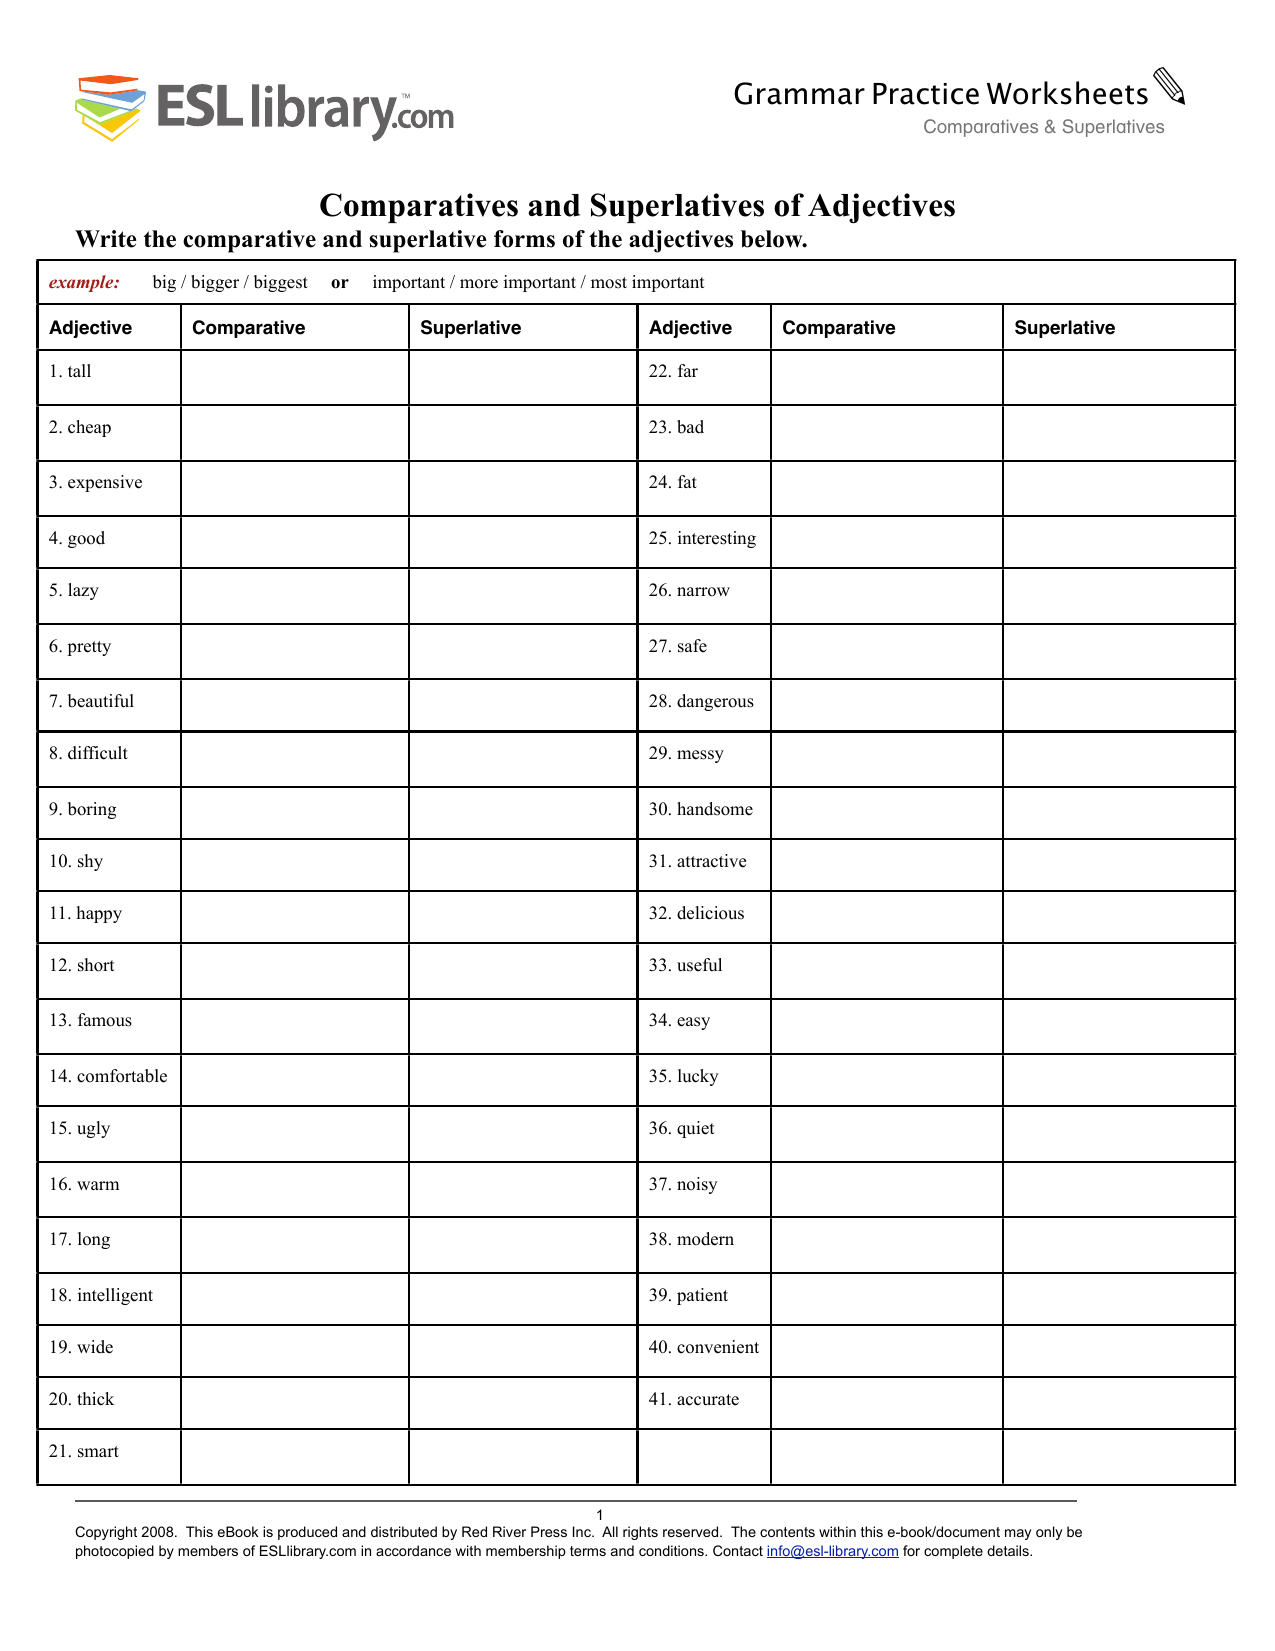 Comparatives practice. Comparisons and Superlatives Worksheets. Comparative and Superlative of adjectives ответы. Comparatives and Superlatives Worksheets ответы. Comparative and Superlative adjectives Practice ответы.